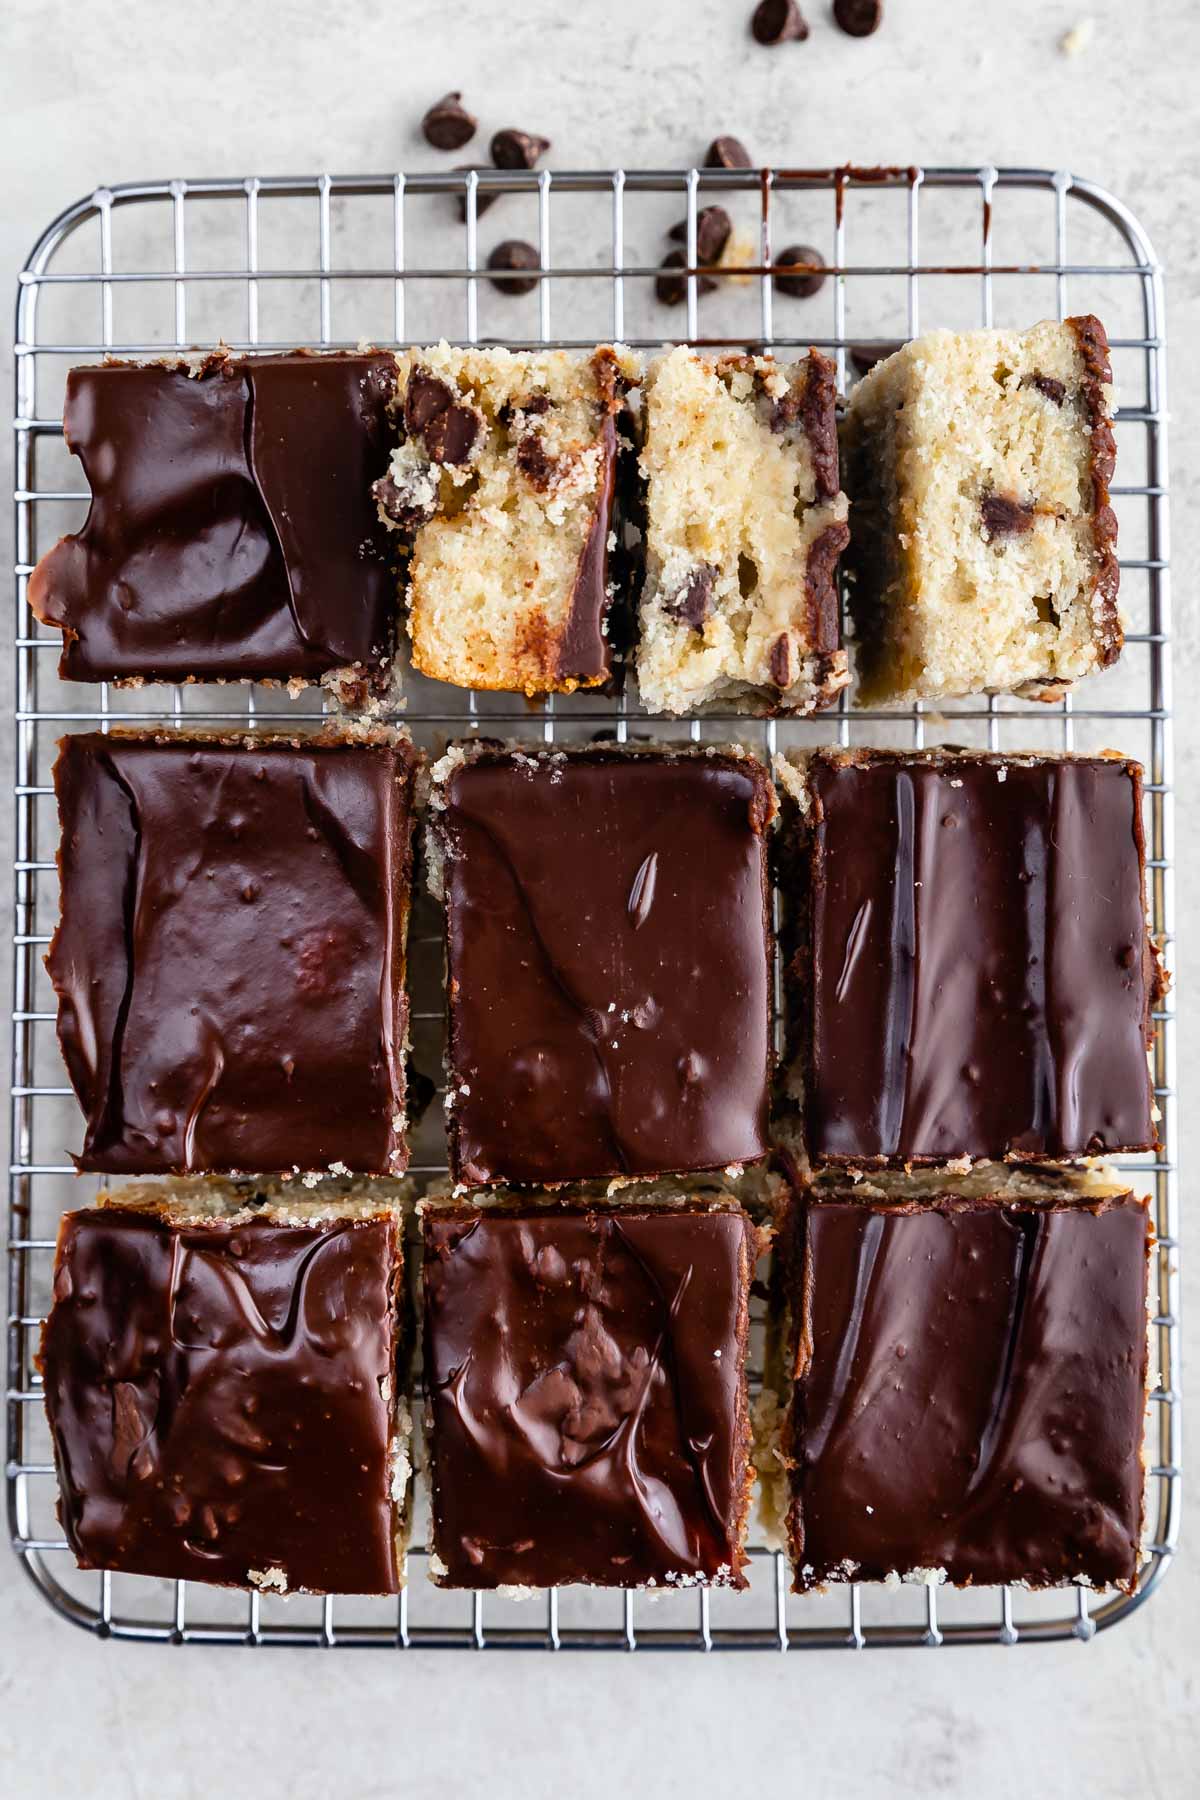 stacked banana bars with chocolate chips baked in.